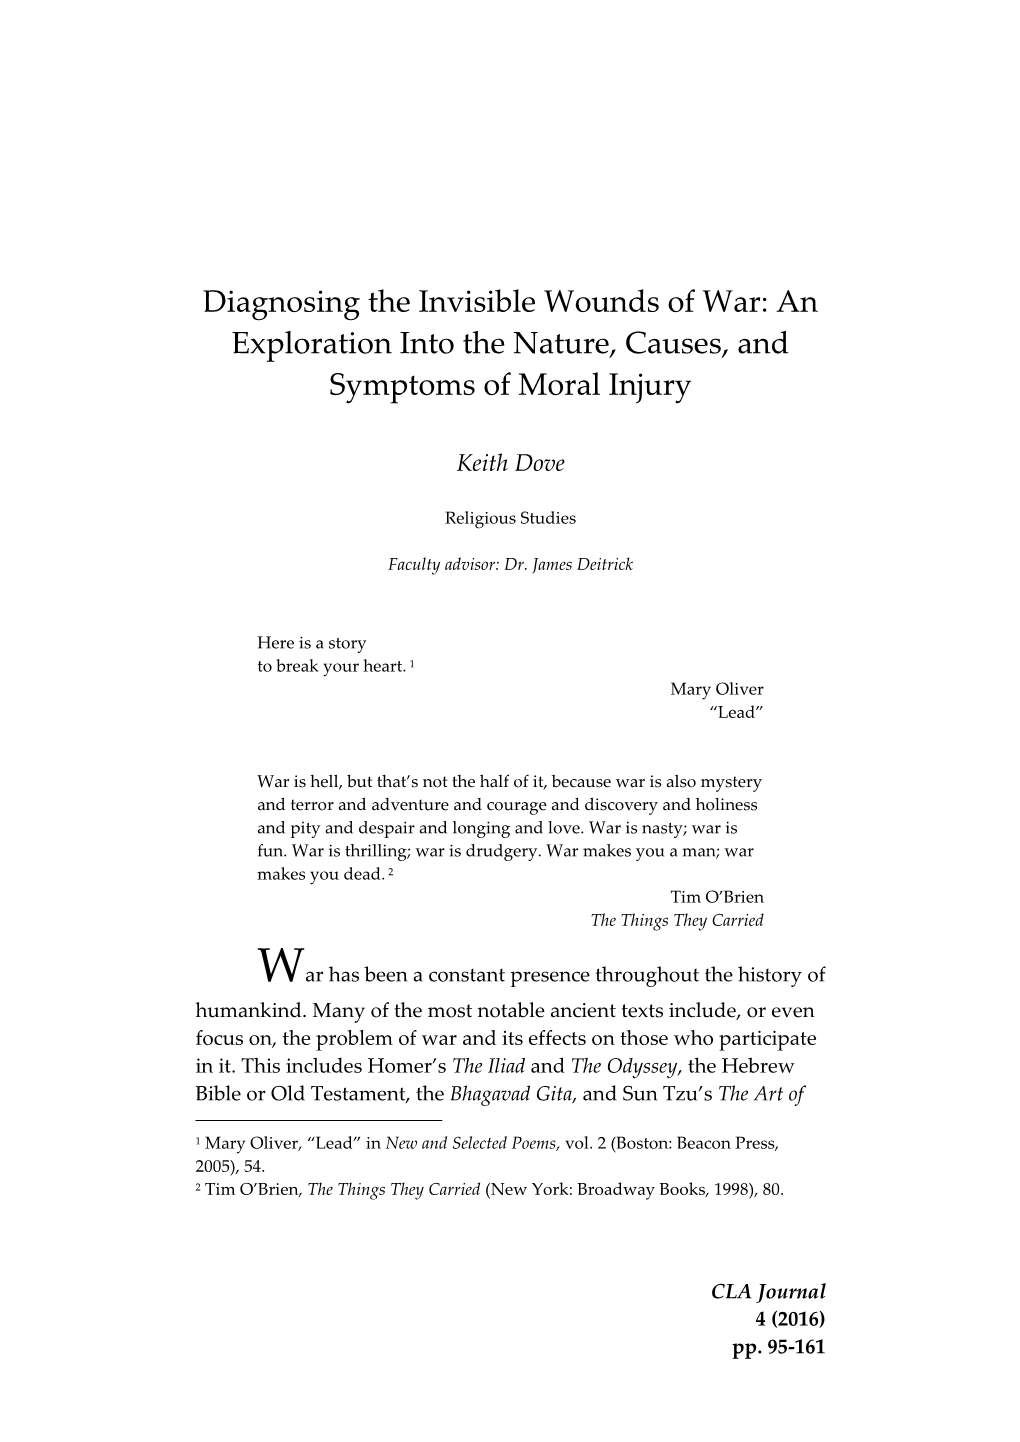 Diagnosing the Invisible Wounds of War: an Exploration Into the Nature, Causes, and Symptoms of Moral Injury